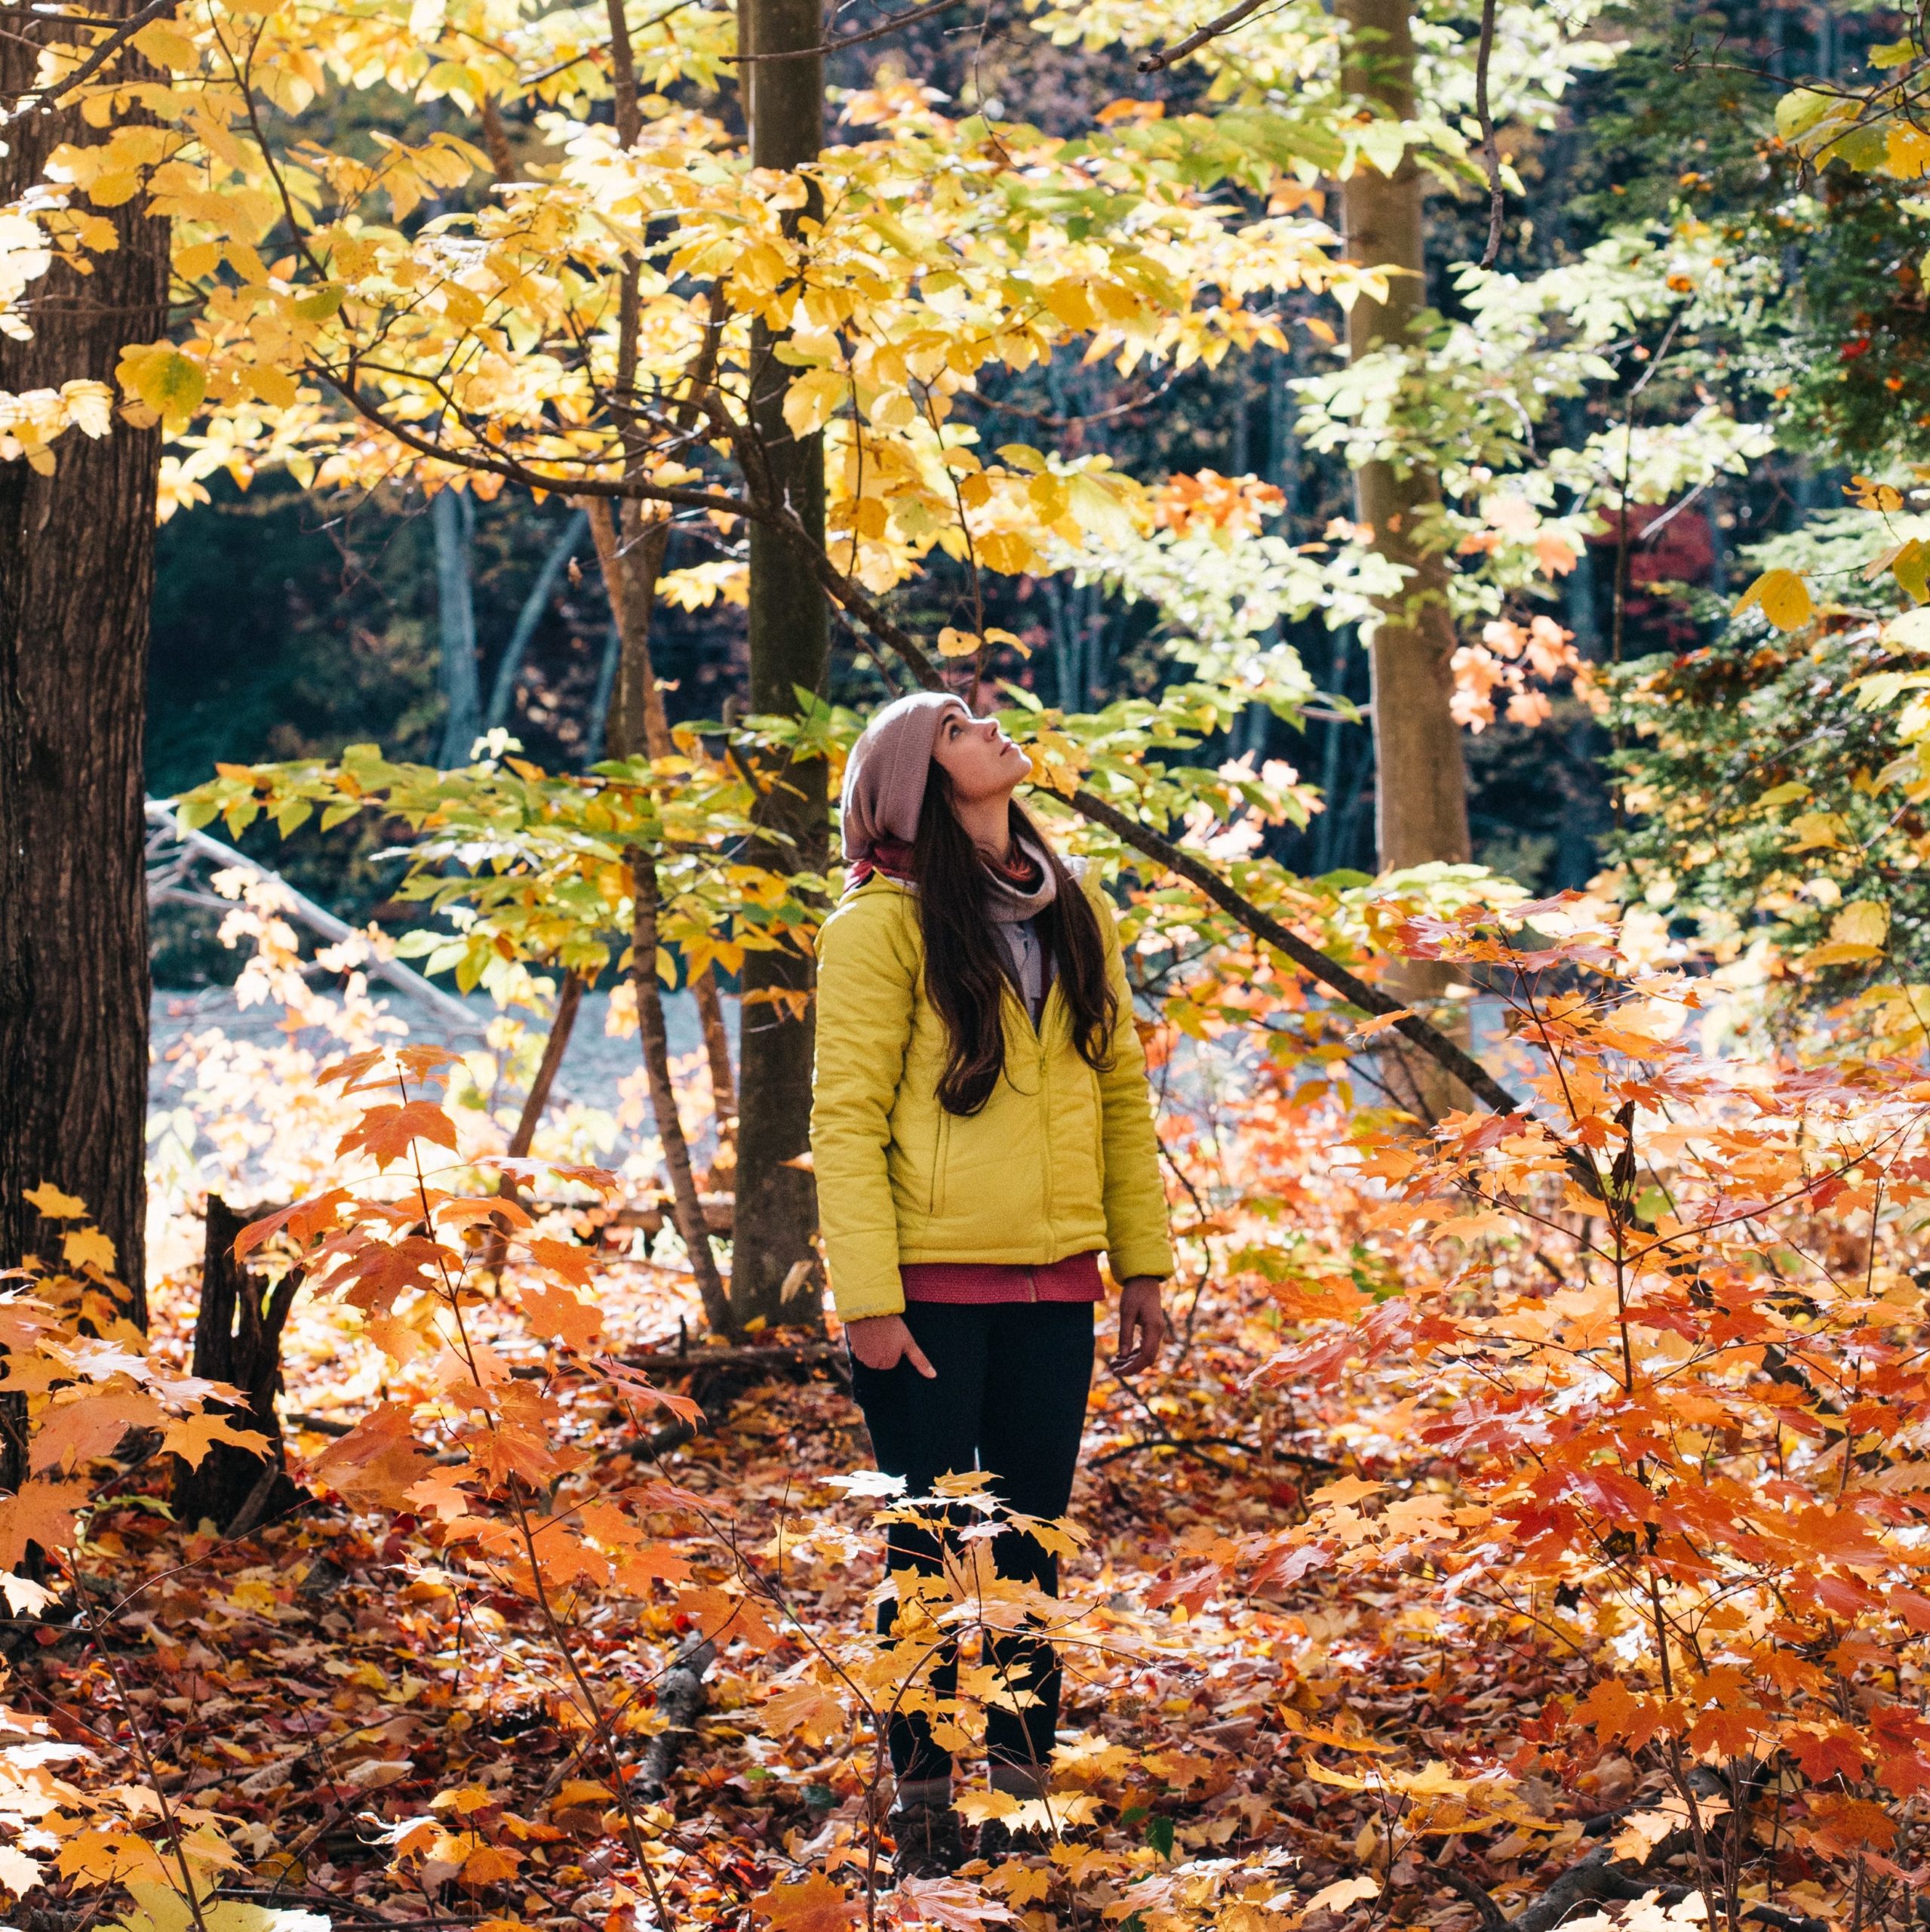 Autumn Self Care Activity: Take a walk in nature - Andrews and Associates Counseling | Therapy in Manhattan, Kansas